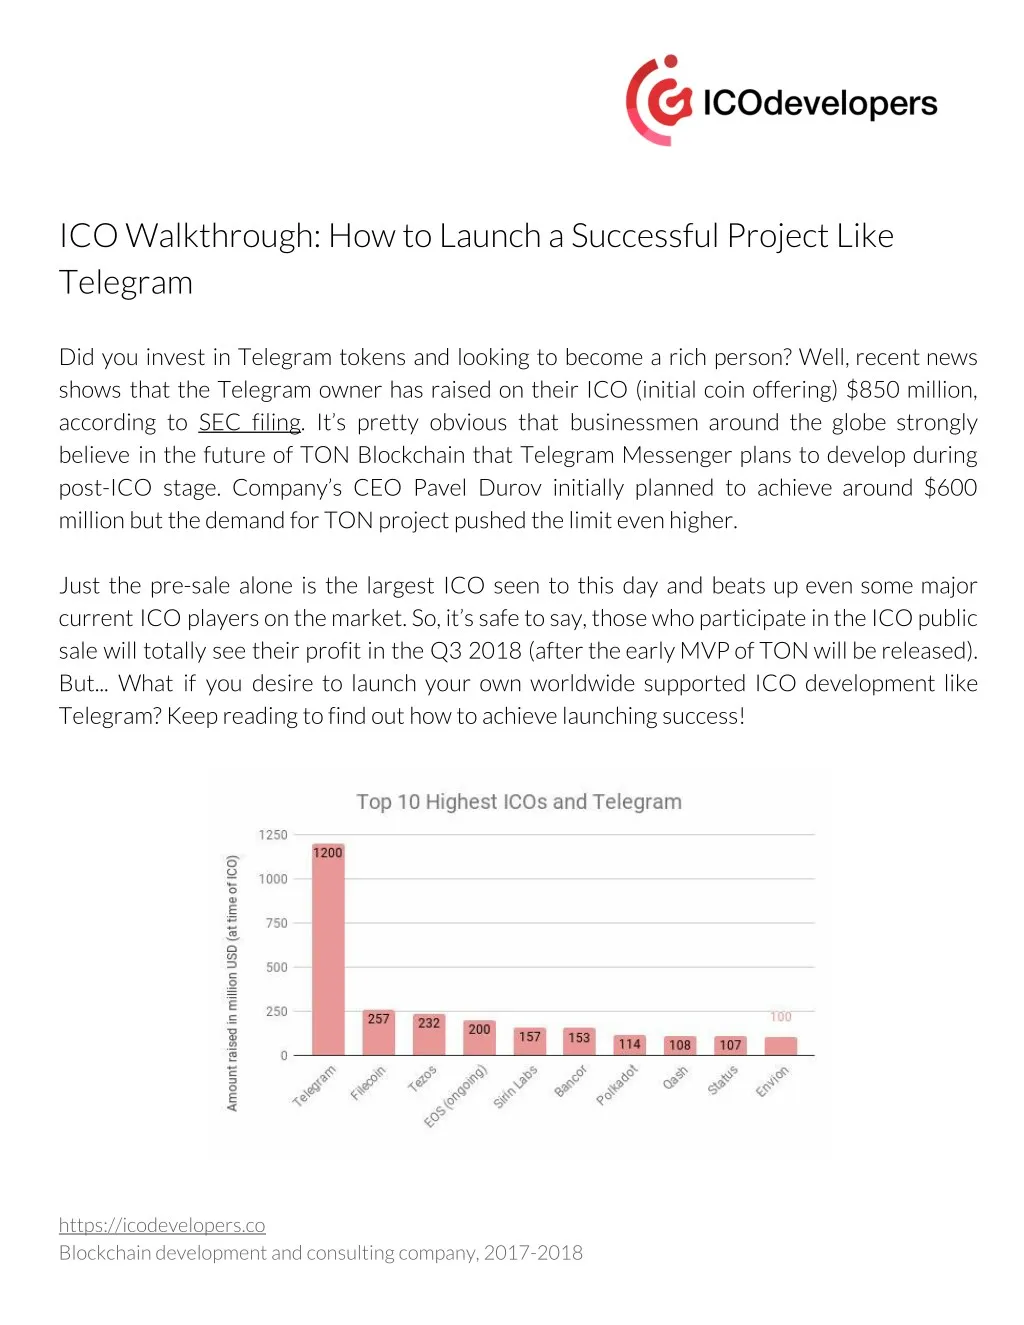 ico walkthrough how to launch a successful